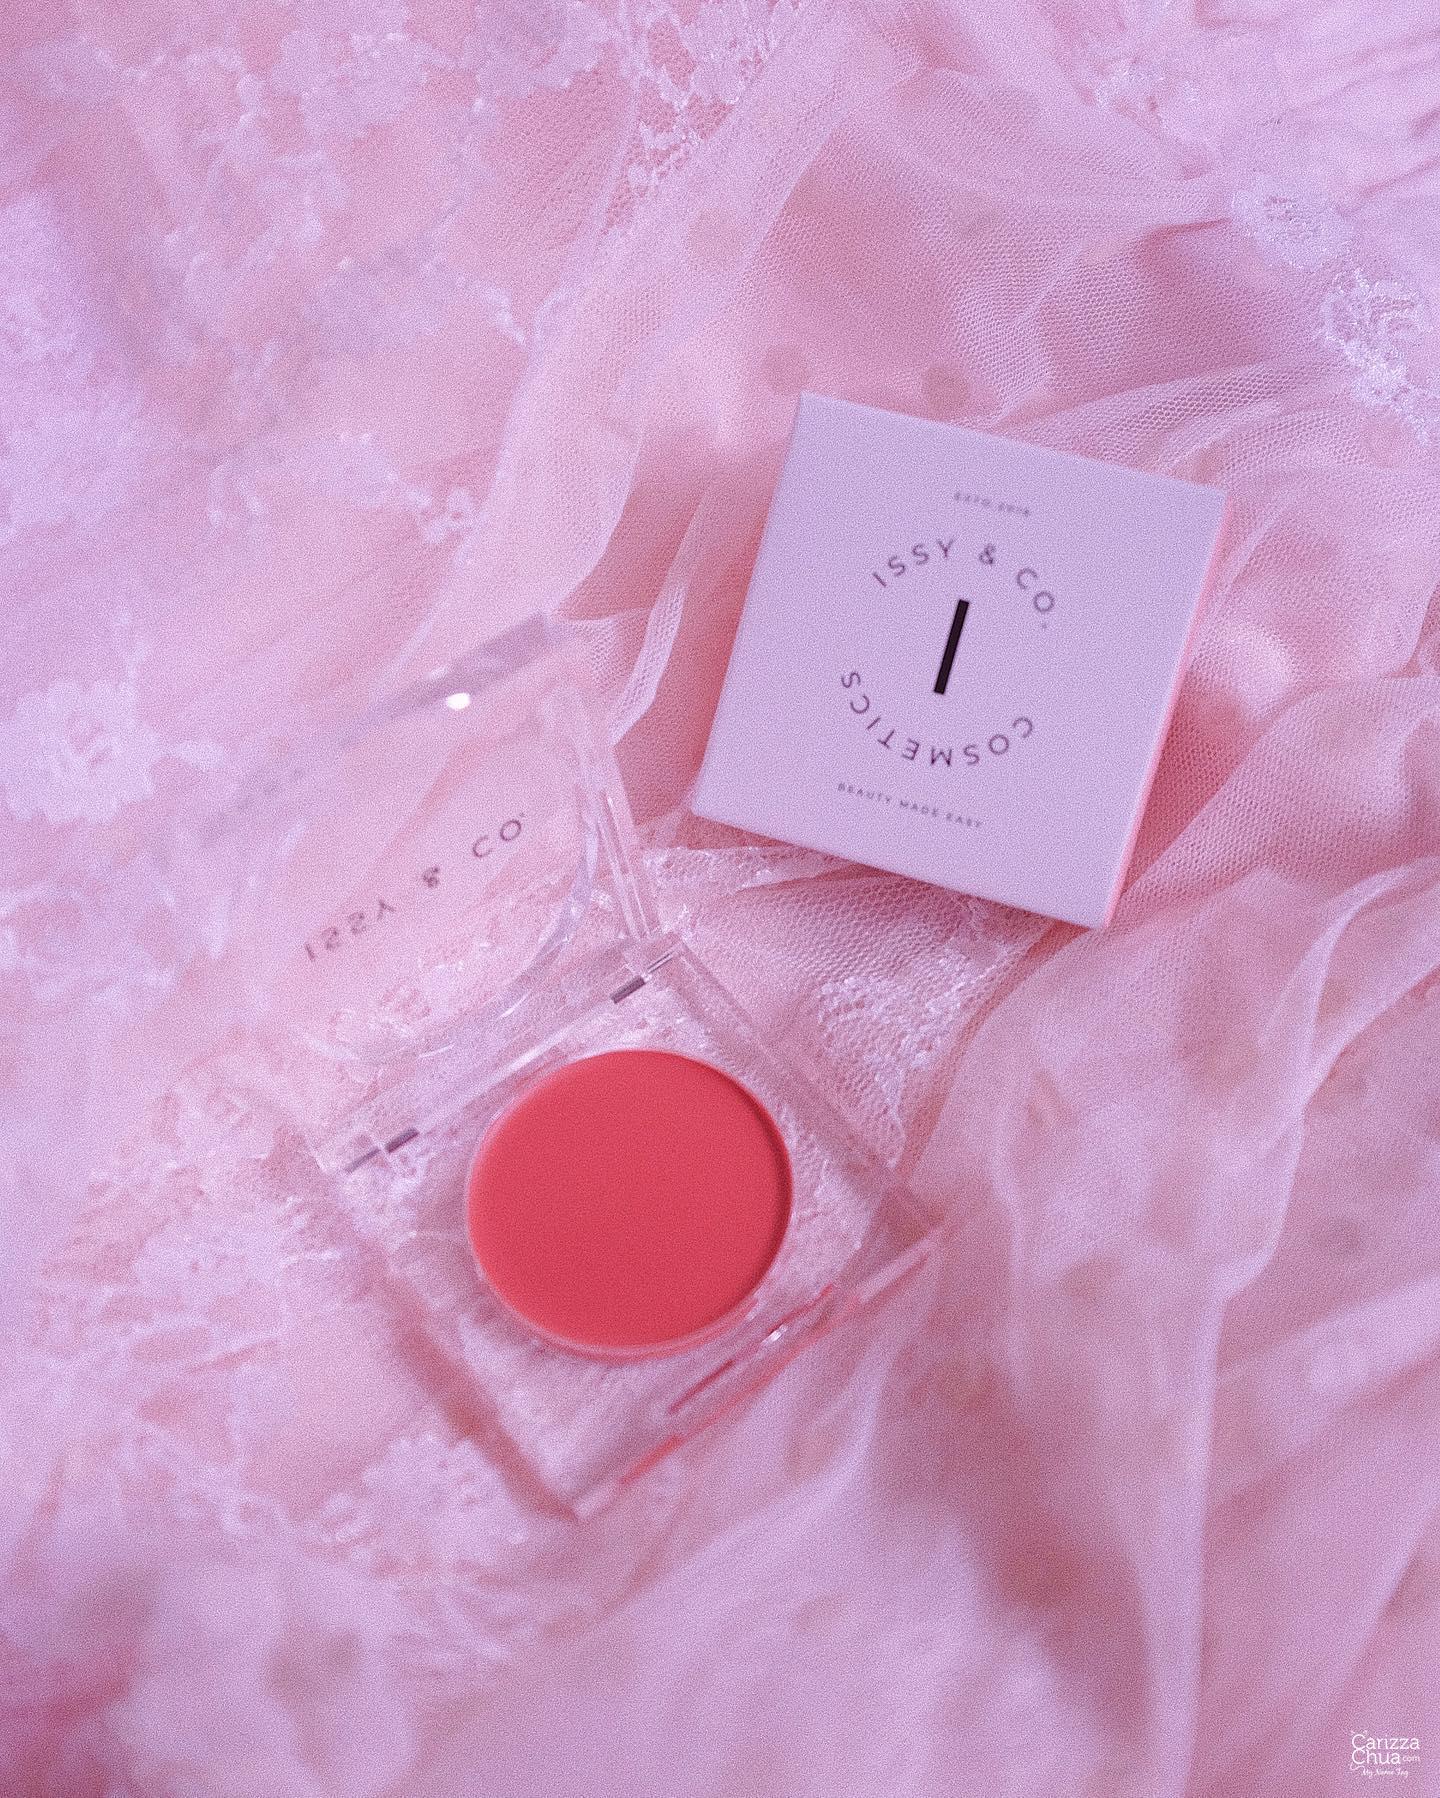 Issy & Co. Cosmetics Creme Blushes on Shopee Beauty